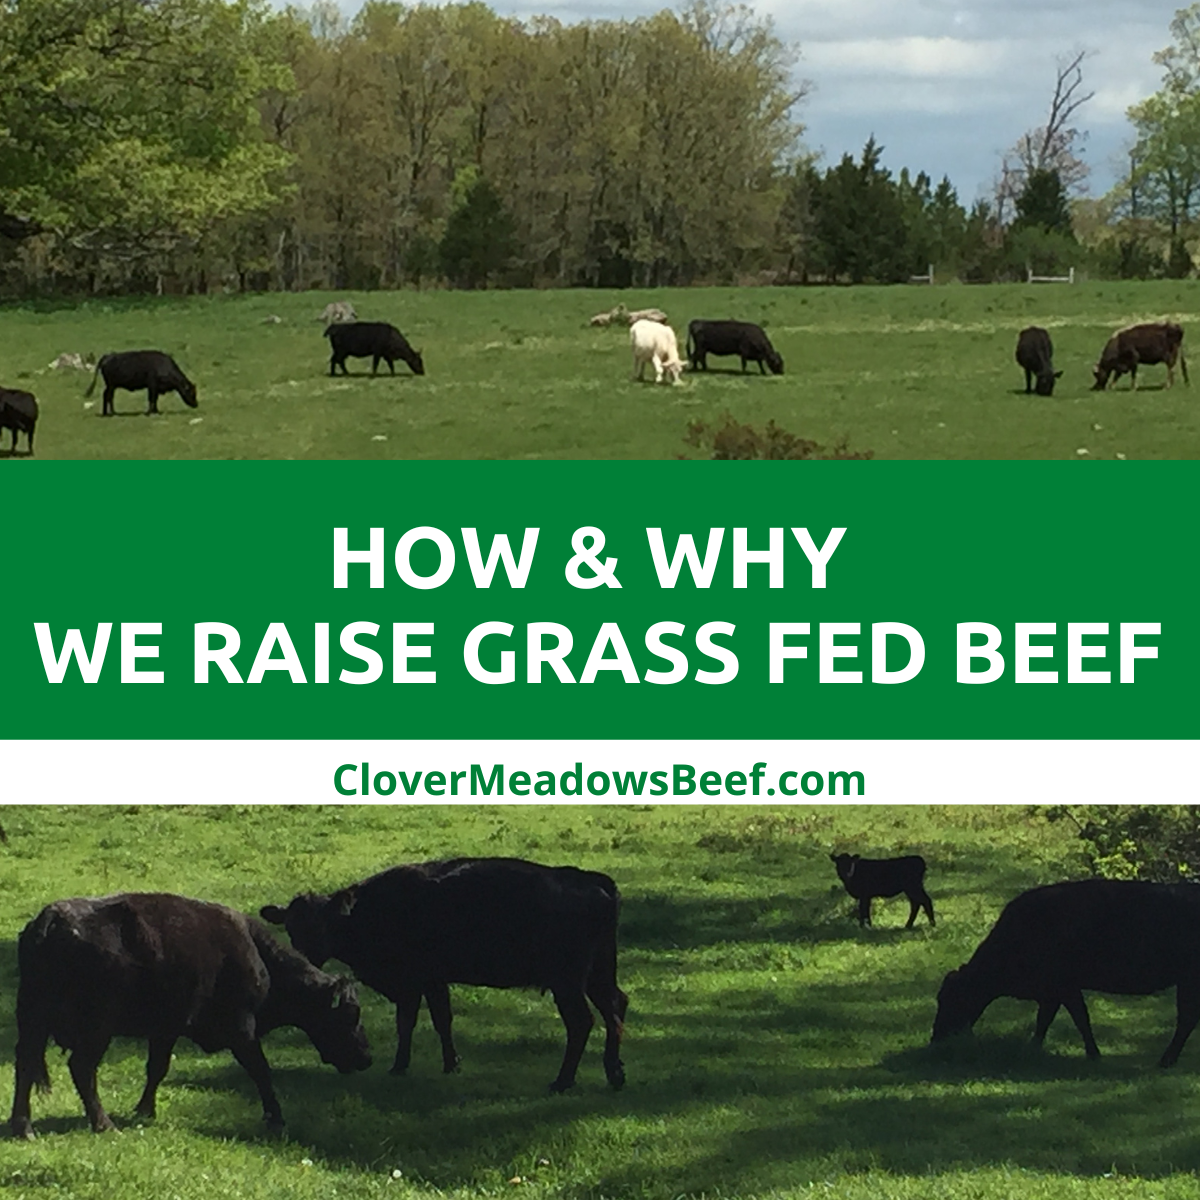 Don't Give Up Meat for the Planet. Grass-Fed Beef Is the Better